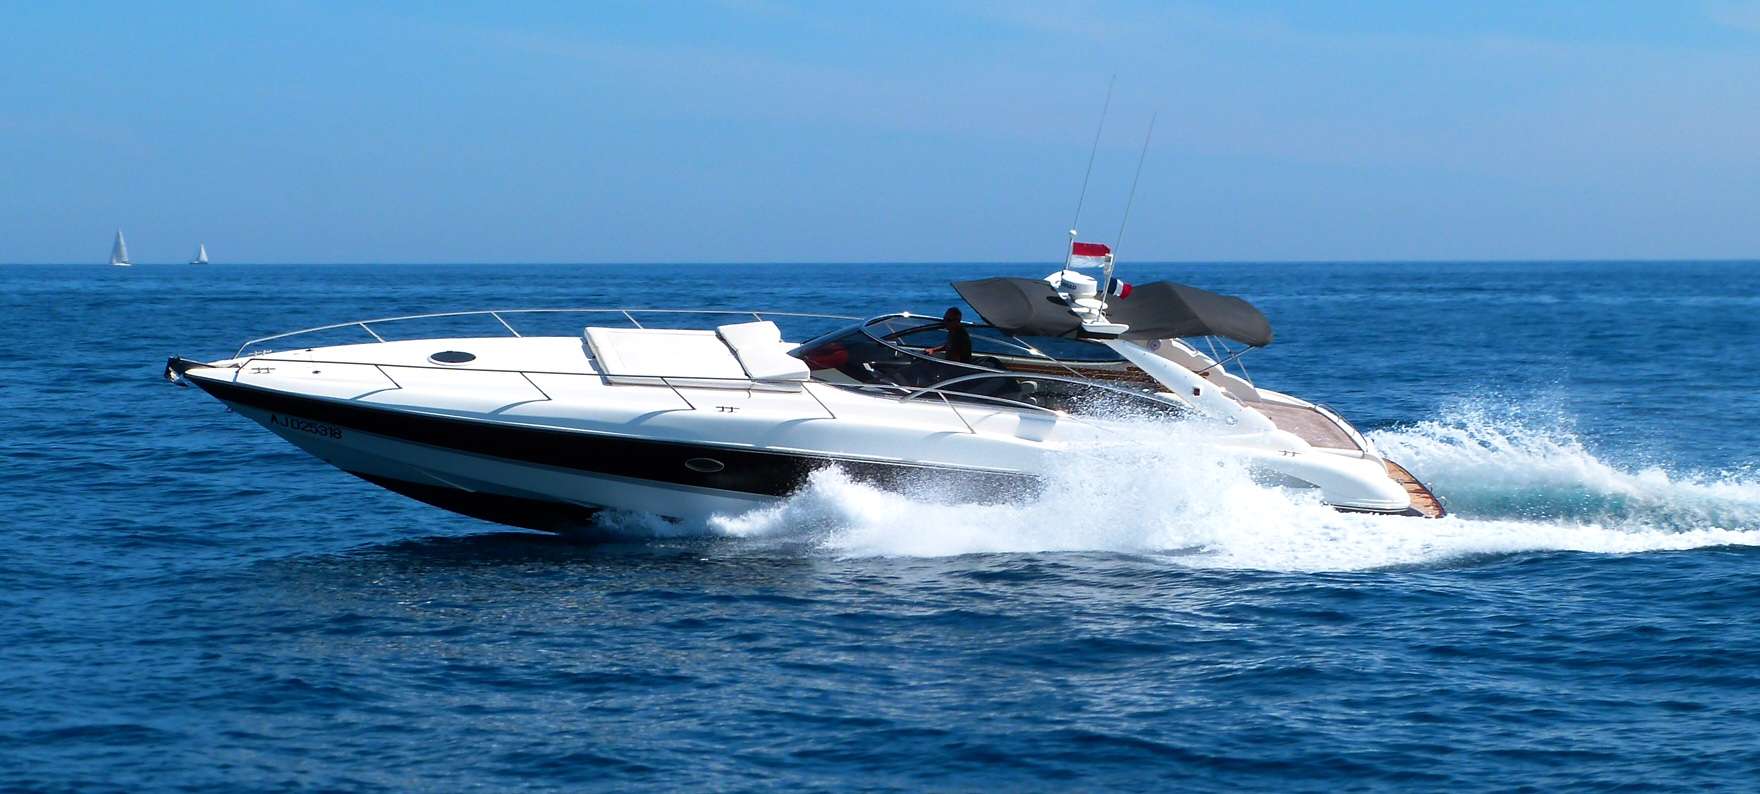 Sunseeker 48 - Motor Boat Charter France & Boat hire in France French Riviera Cannes Vieux port de Vallauris 4